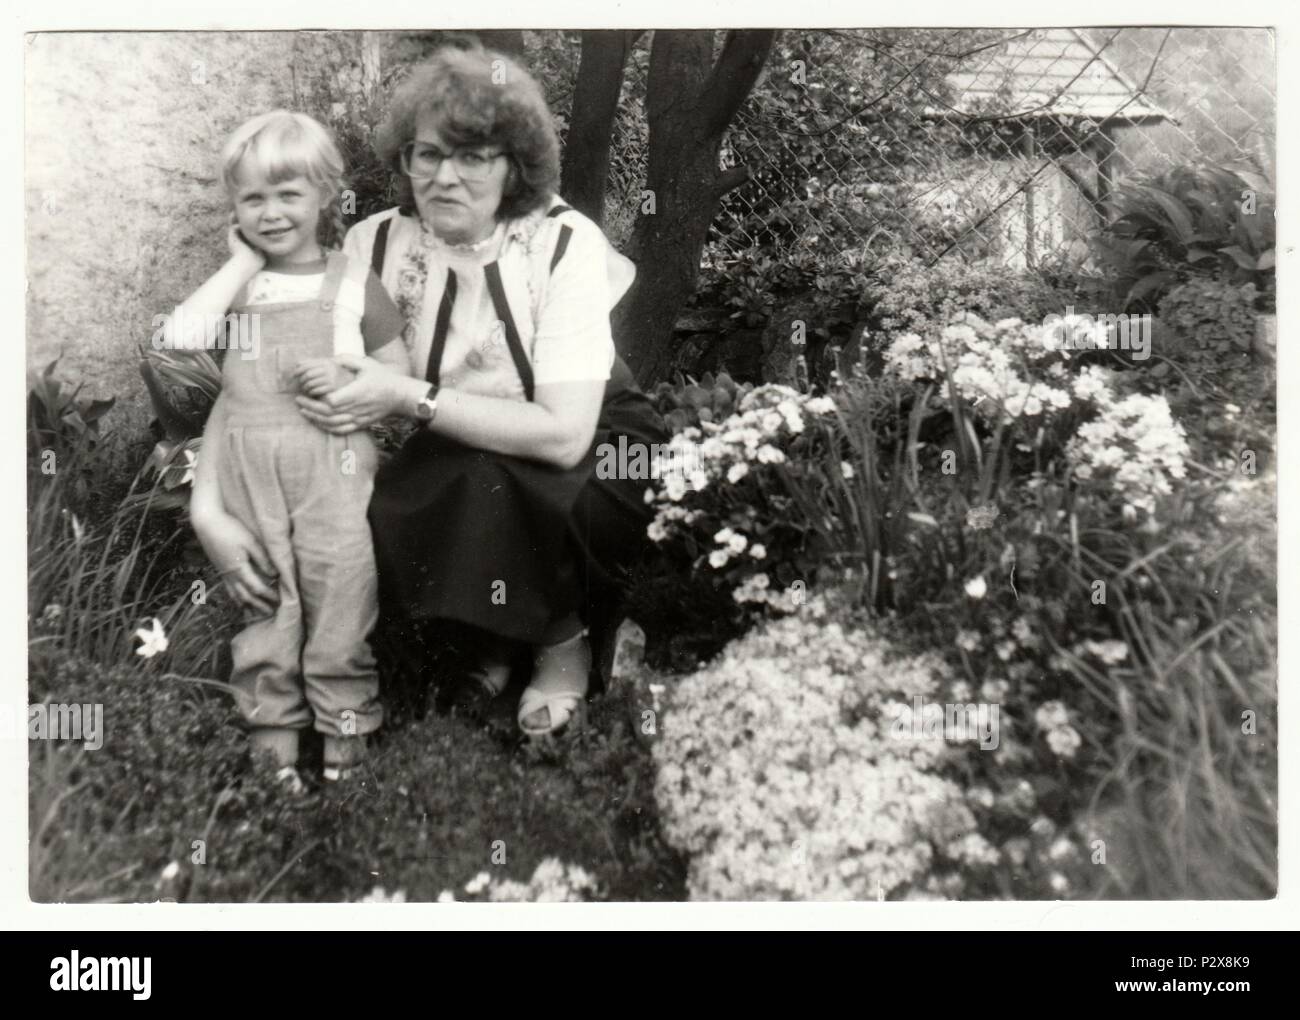 THE CZECHOSLOVAK SOCIALIST REPUBLIC - CIRCA 1980s: Vintage photo shows woman with a small girl in the garden. Holidays in the summertime. Retro black & white  photography Stock Photo